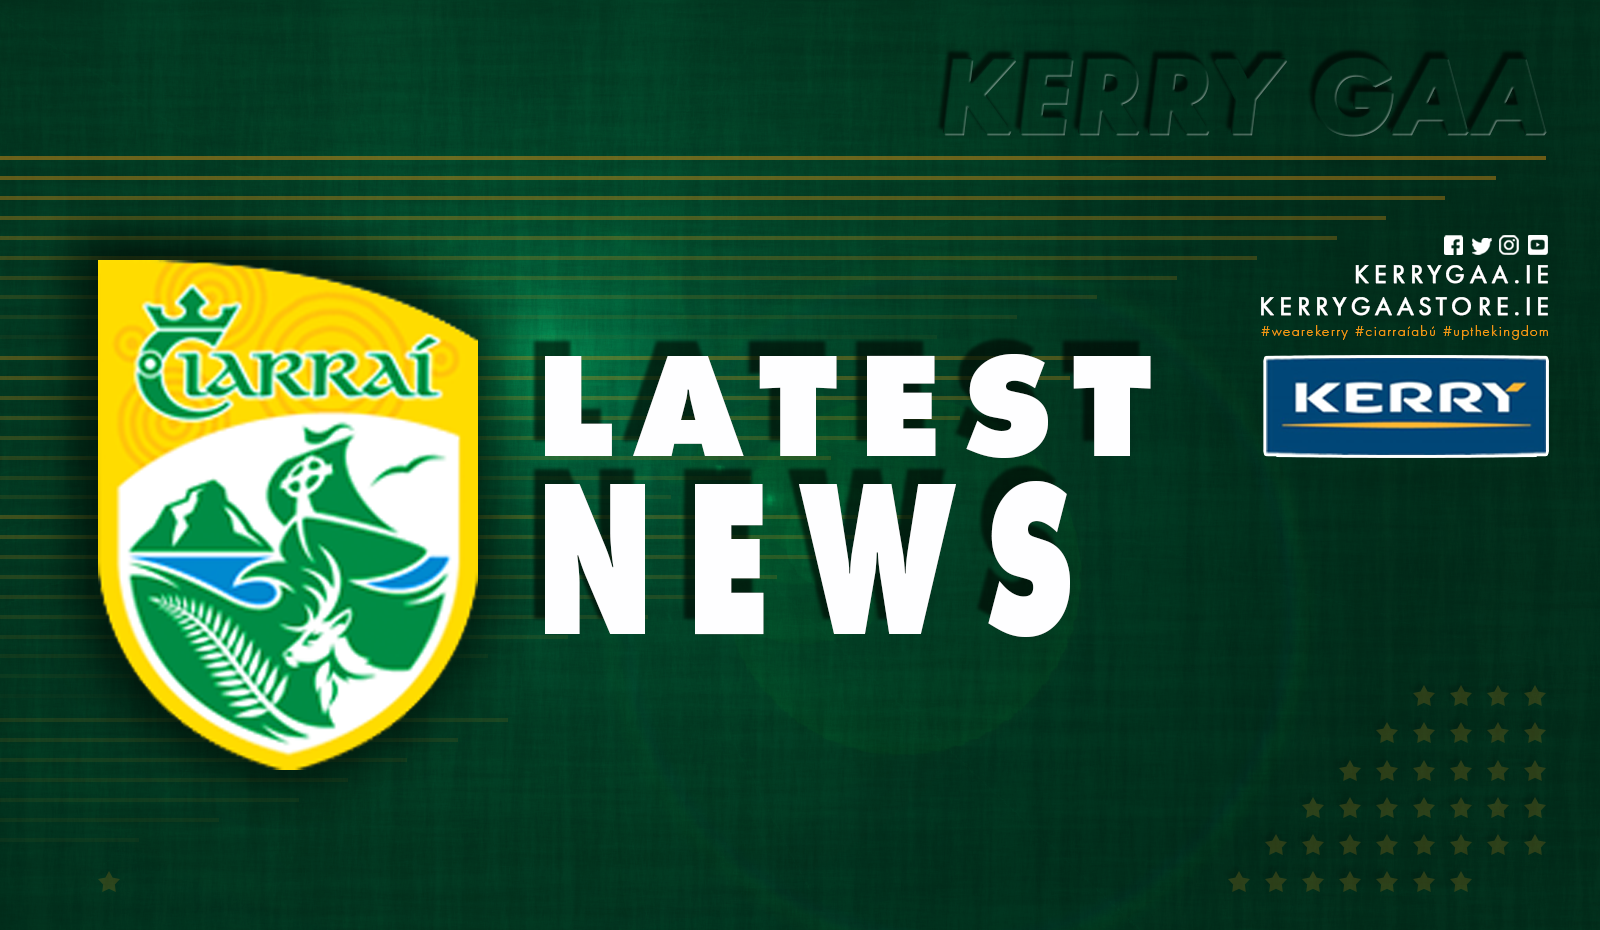 Statement from Kerry GAA